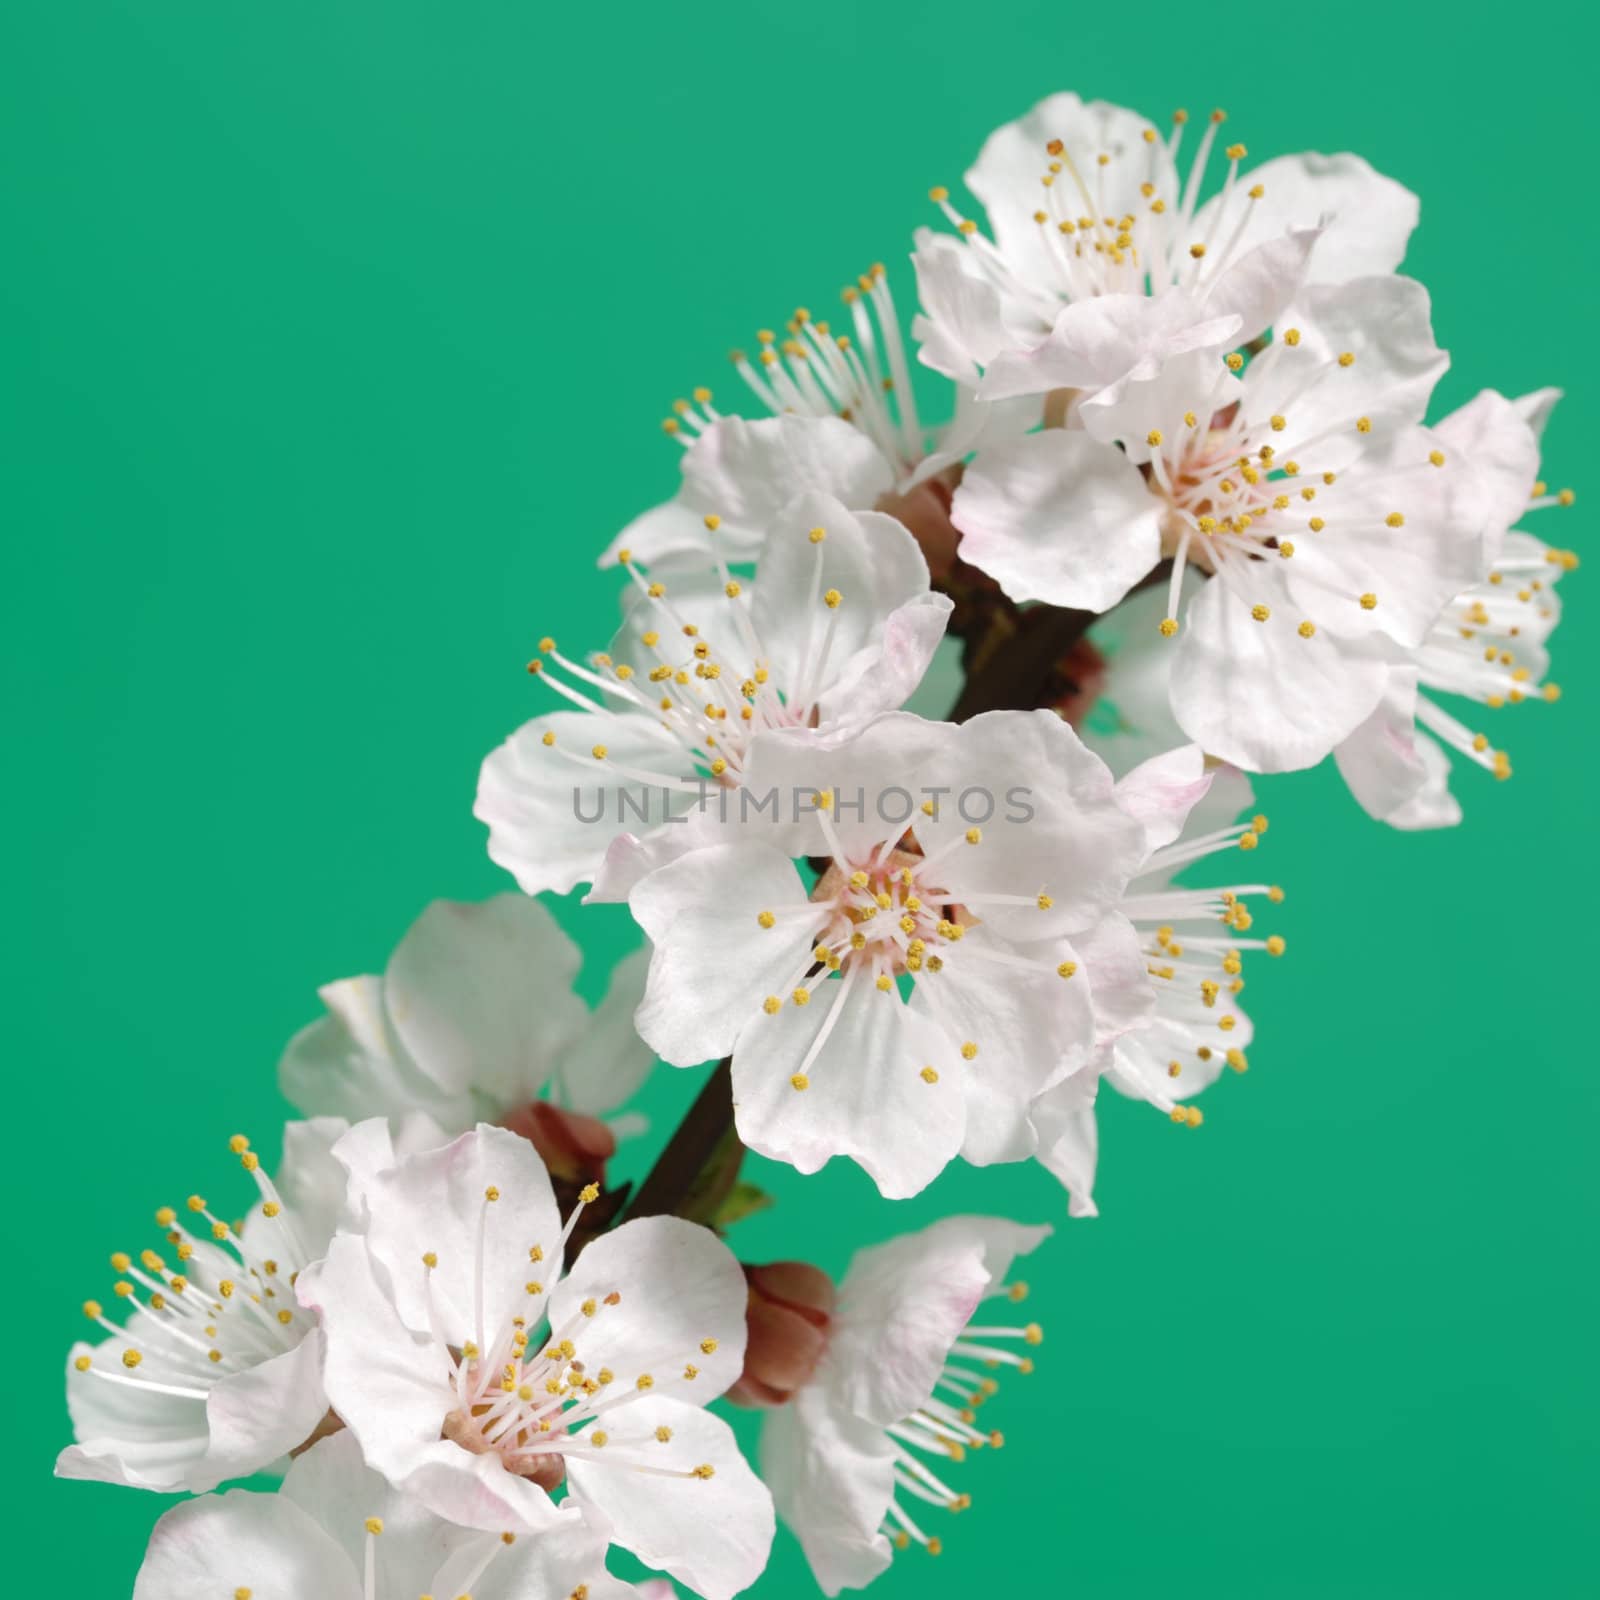 Blossoming branch of a tree. A fruit tree - an apricot, blooming in the early spring